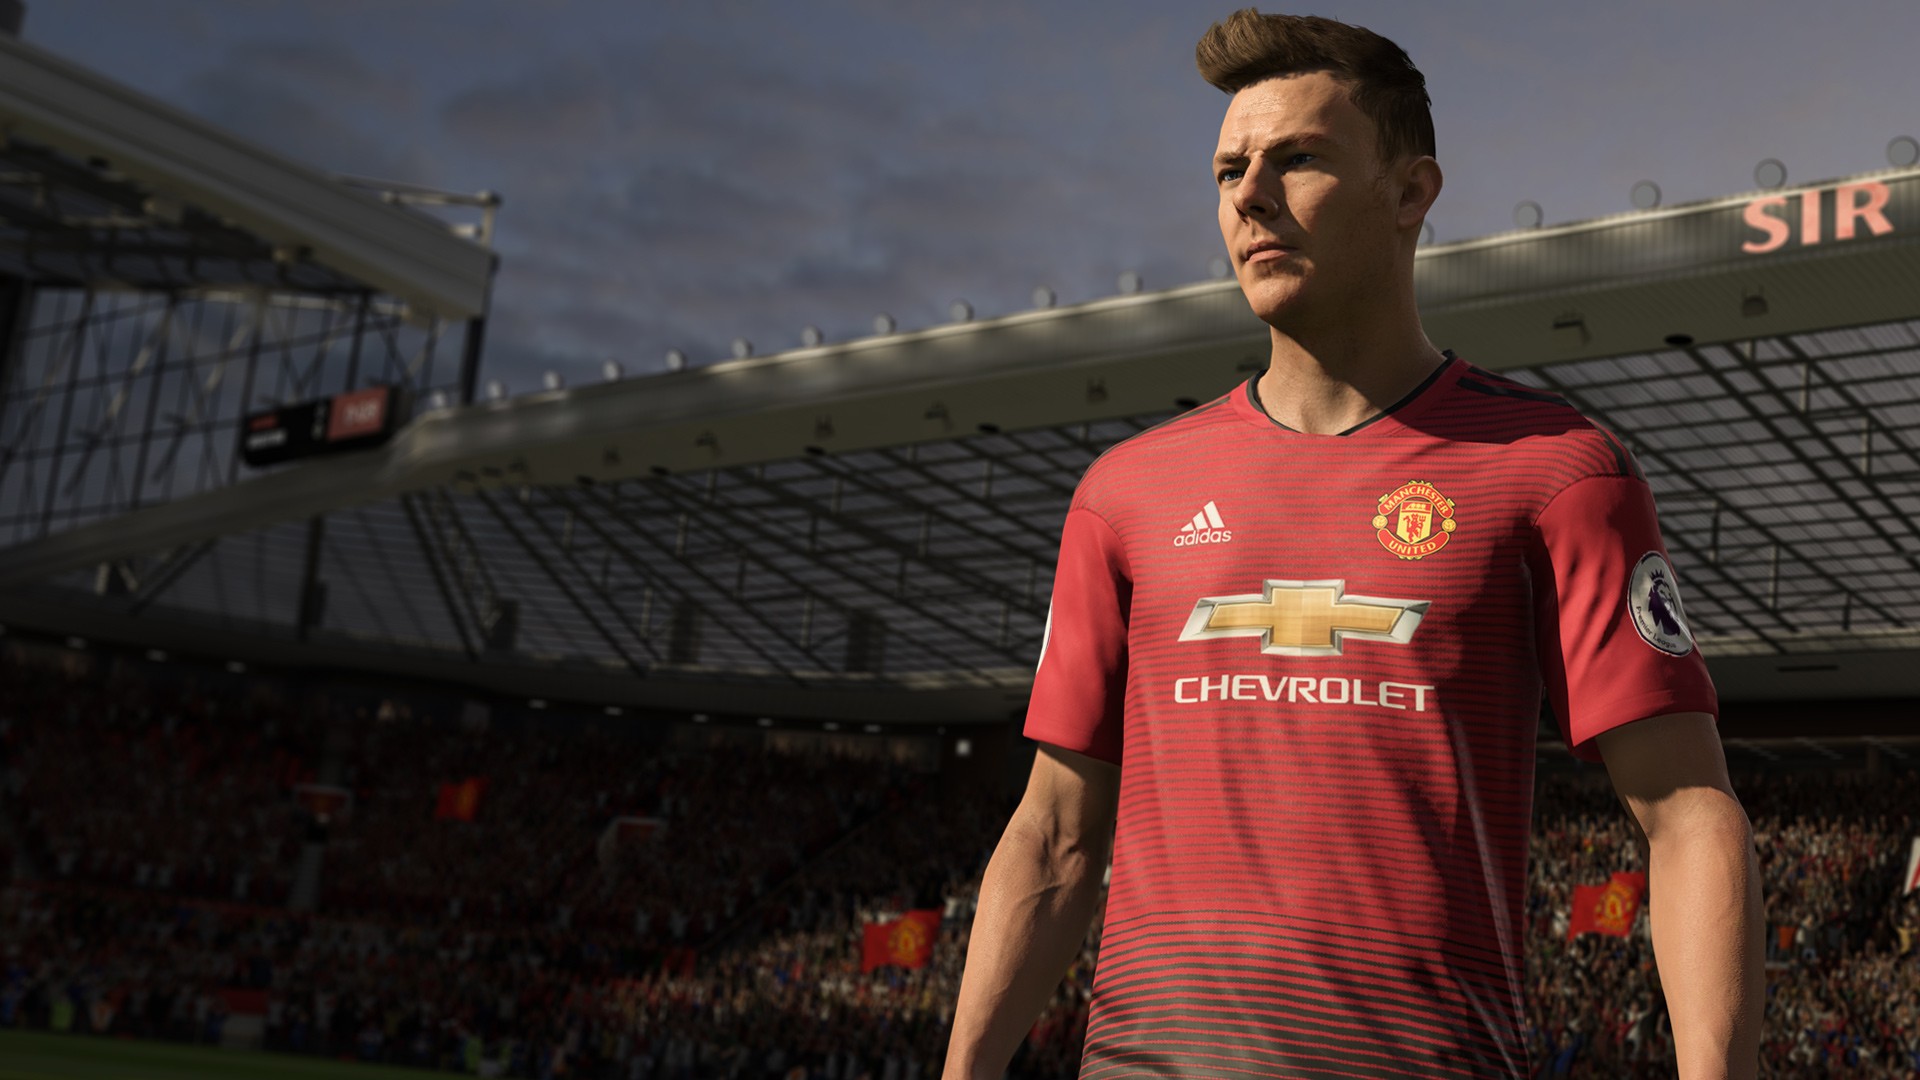 FIFA 19 Incl Update 4 Free Download